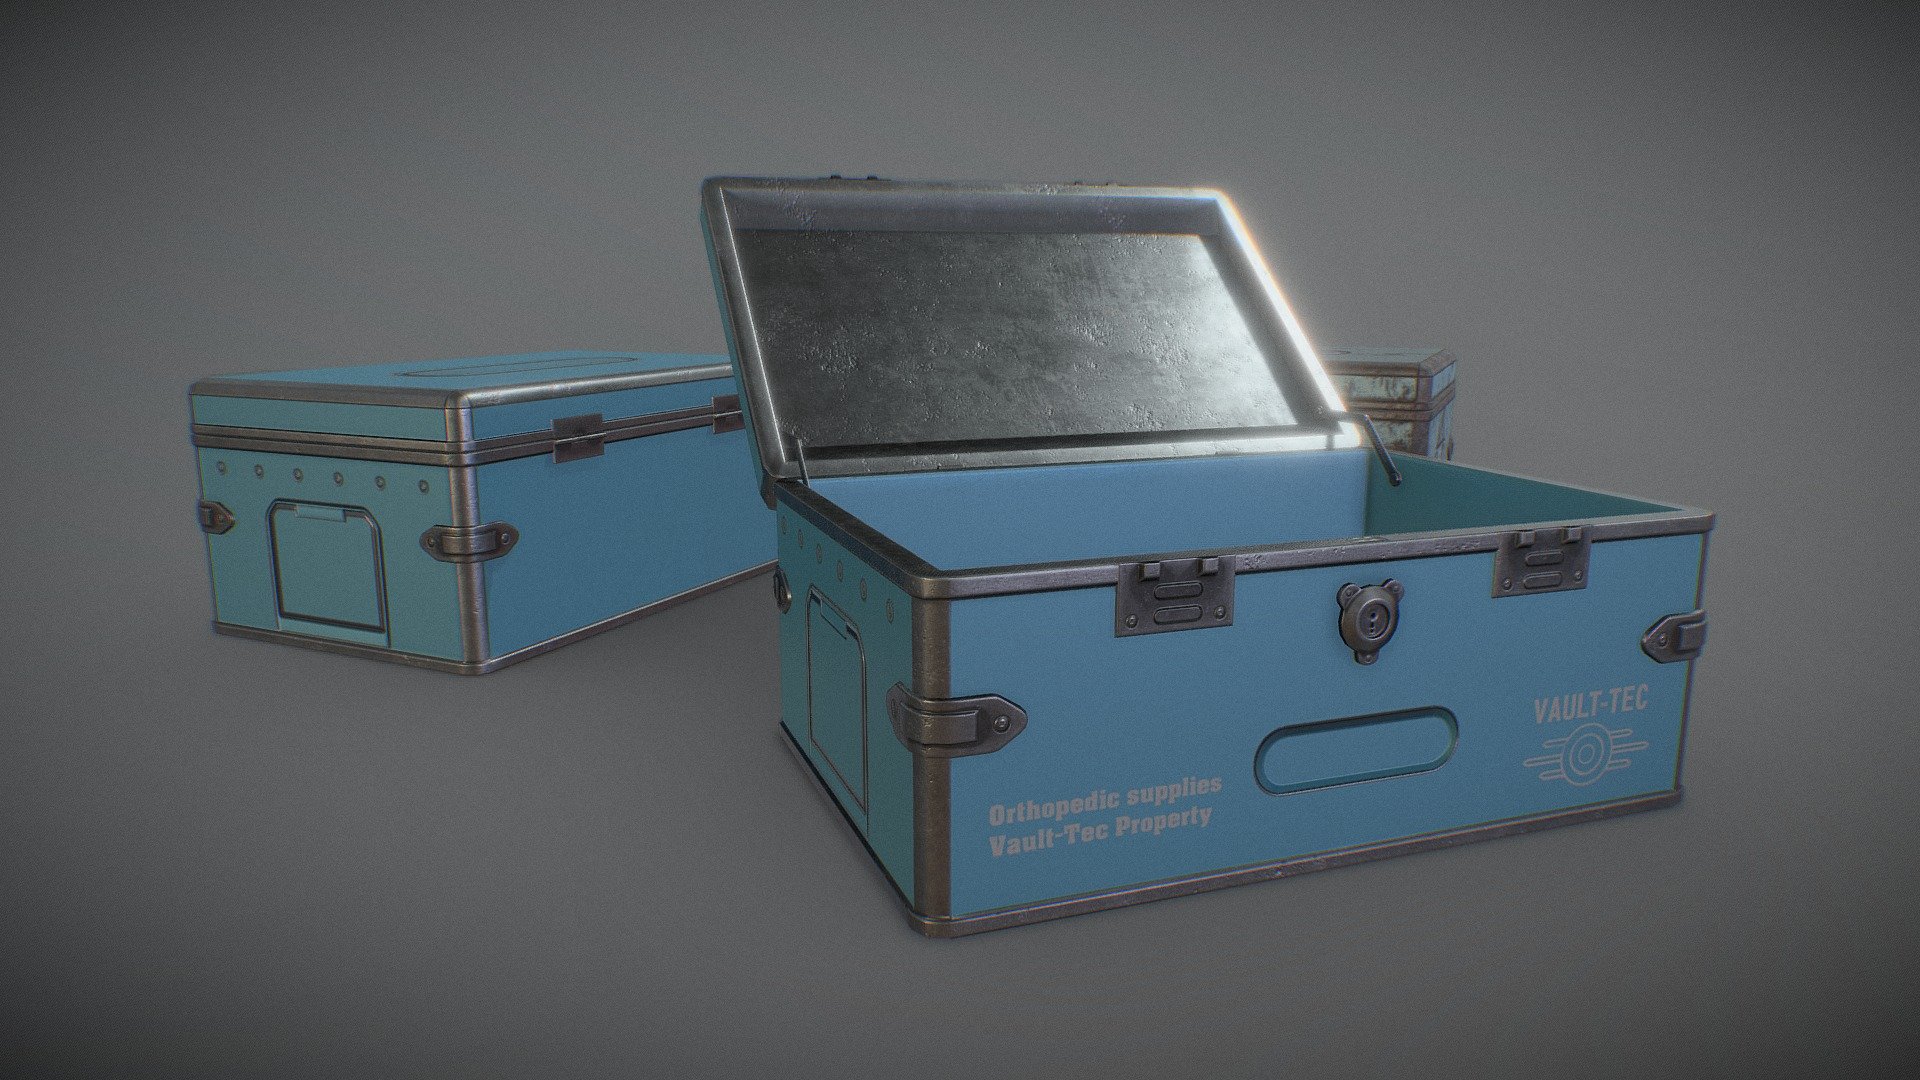 Prop asset. Based on a similar prop from Fallout 3. https://fallout.fandom.com/wiki/Trunk

Variant with rusty textures 3d model